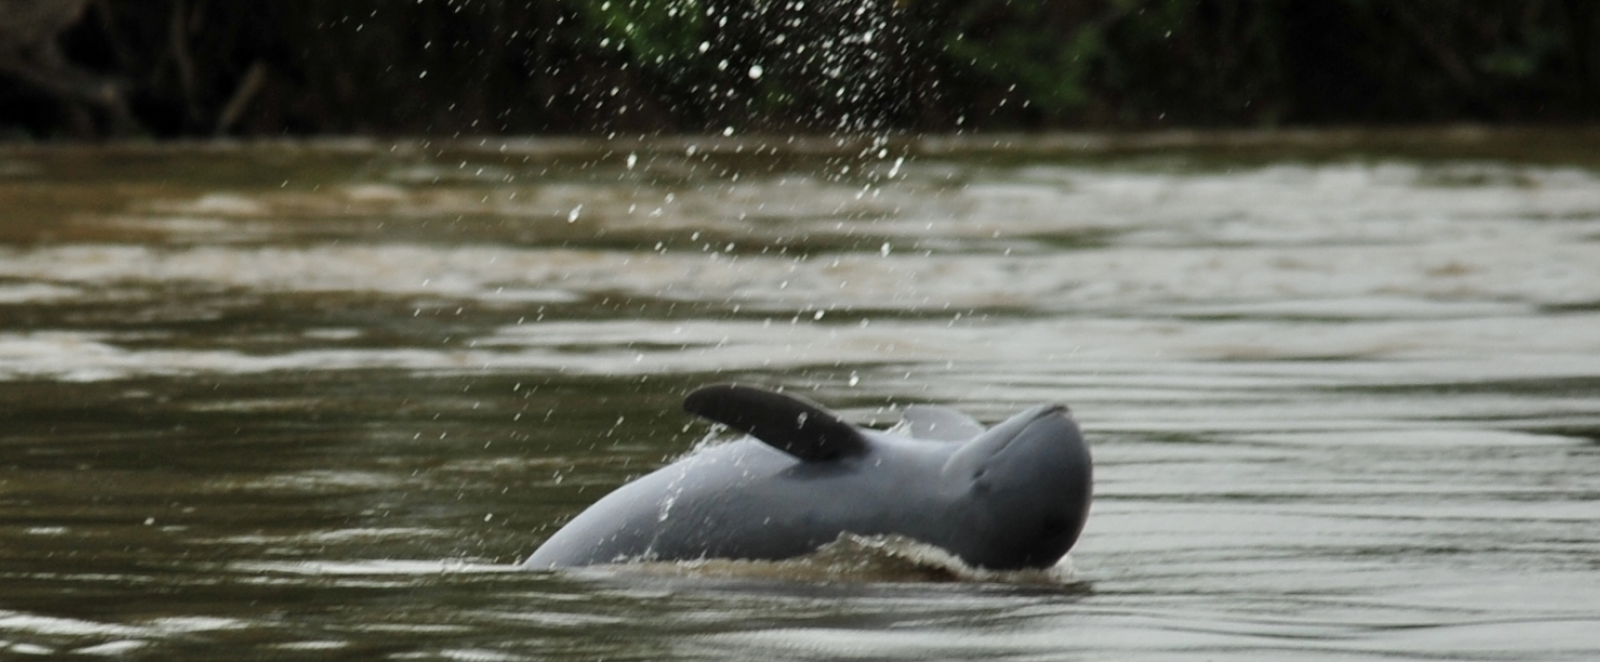 The many threats facing Indonesia's endangered Irrawaddy dolphins